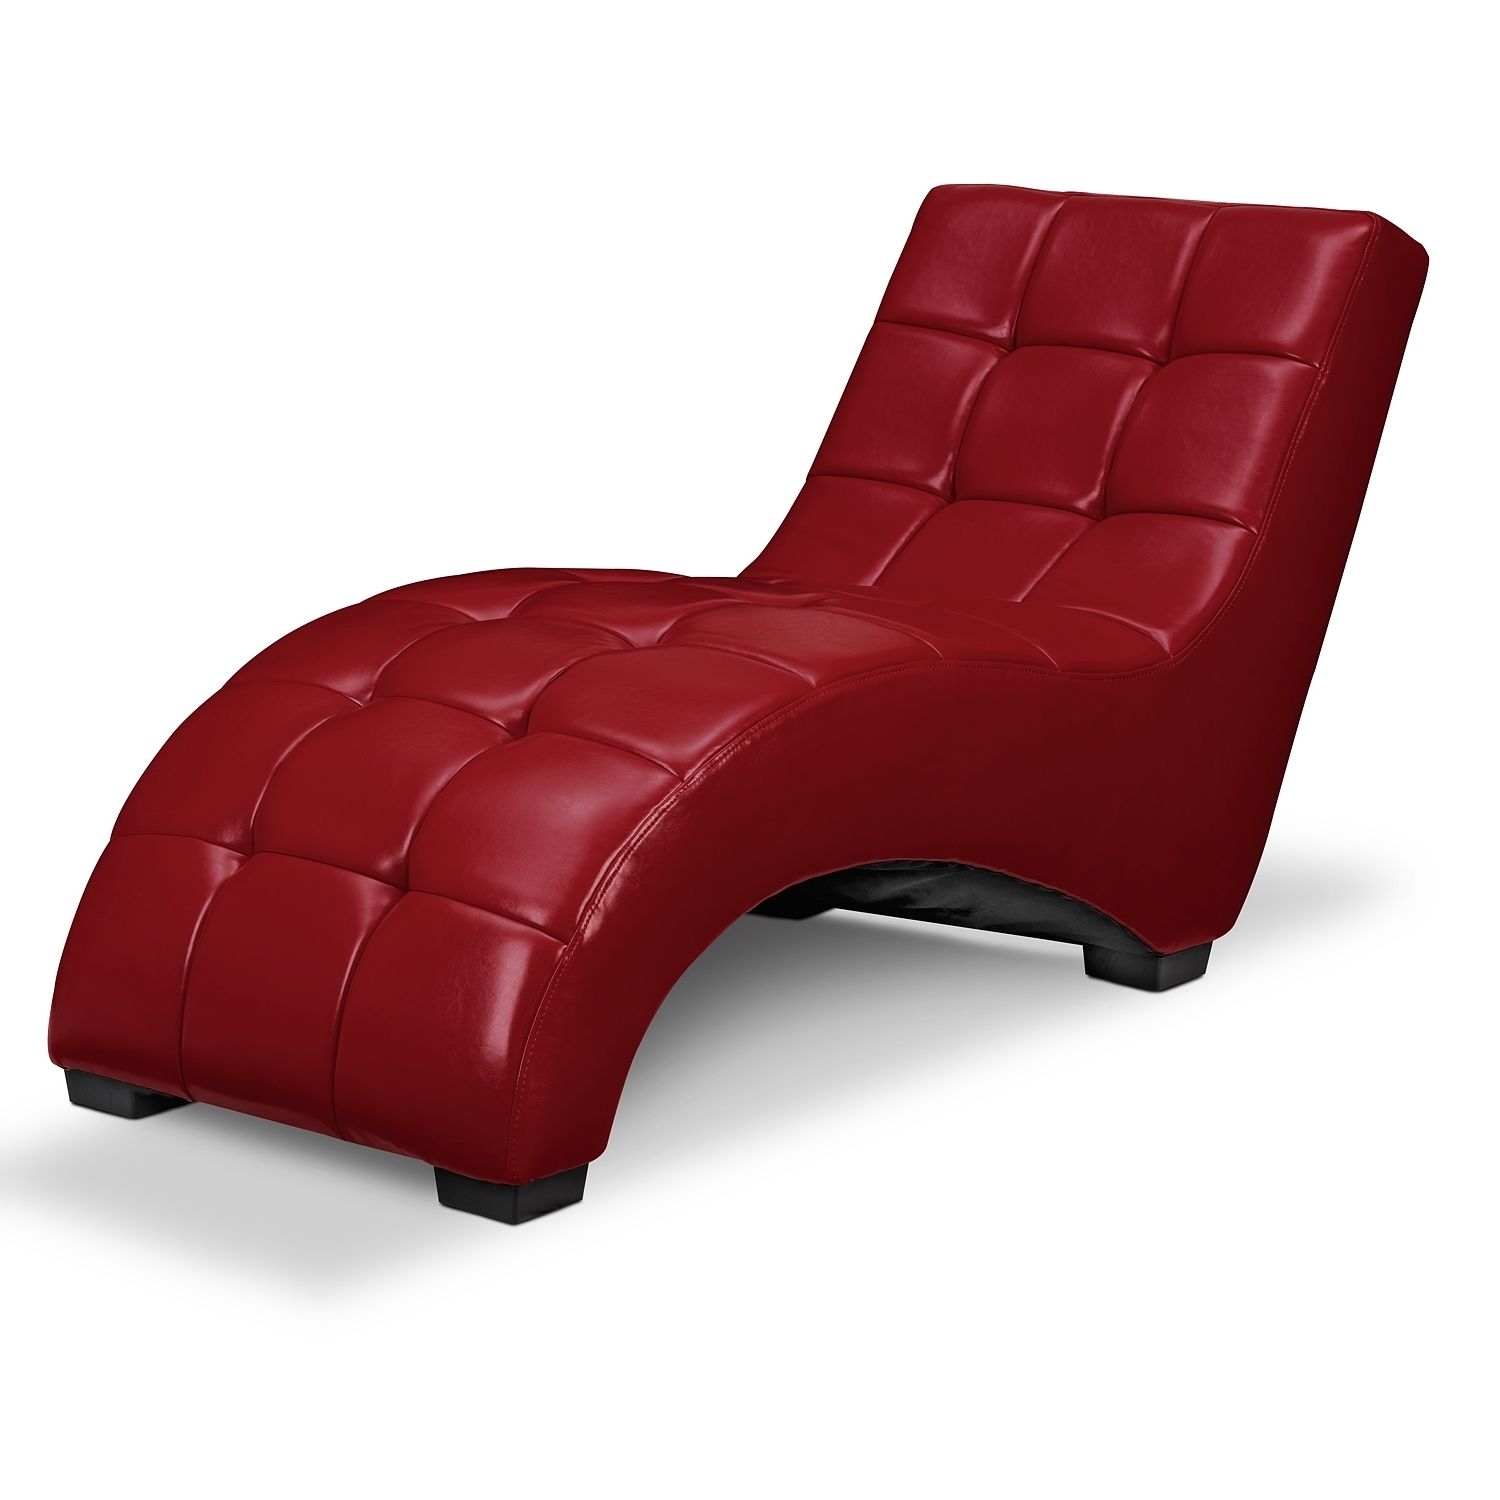 Red Chaise Lounges Regarding Preferred Red Leather Chaise Lounge Chair • Lounge Chairs Ideas (View 3 of 15)